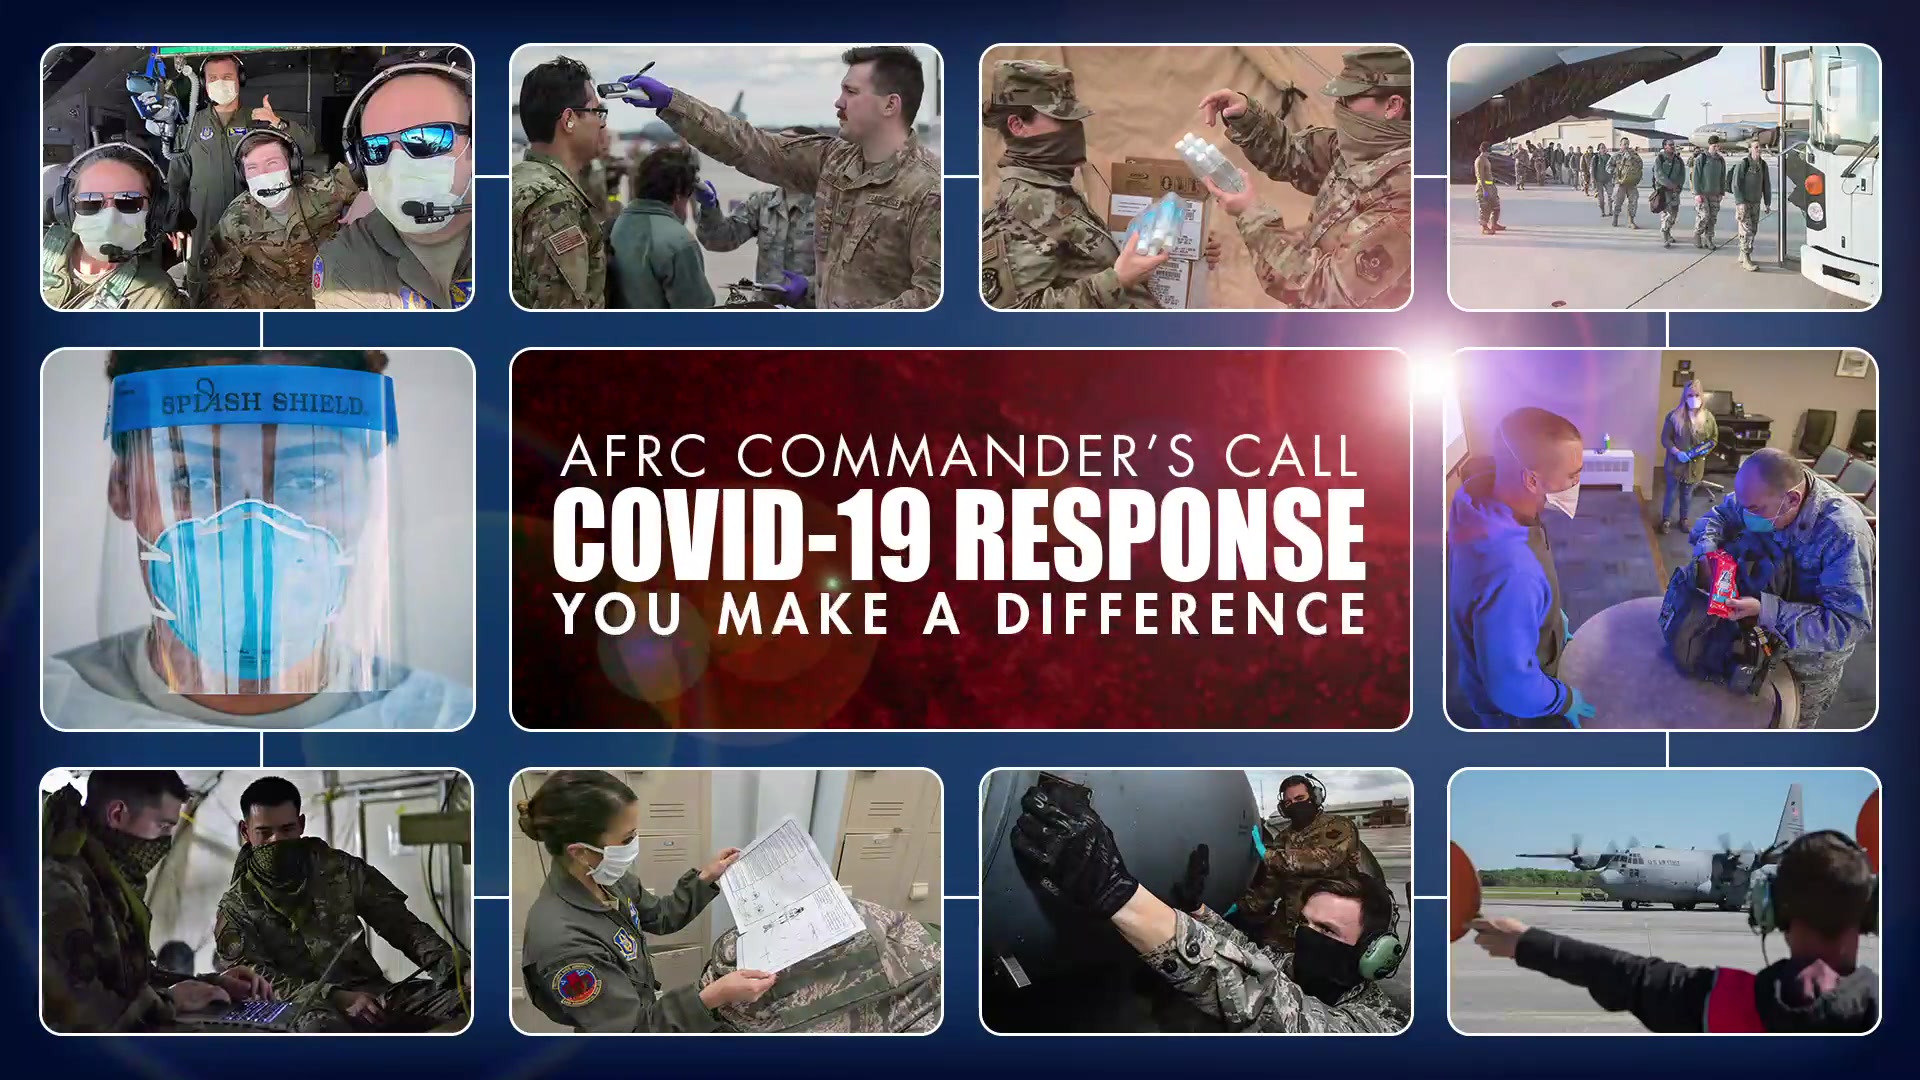 During these extraordinary times, Lt. Gen. Richard Scobee, Commander, Air Force Reserve Command provides the Hq AFRC personnel with a virtual Commander's Call.  Covering important topics such as a COVID-19 update; Climate Survey Results, and announcing the Quarterly Award Winners.  The Deputy Commander, Maj. Gen. John Flournoy, Jr. and the Command Chief Master Sergeant, CMSgt. Timothy White, Jr. will also provide comments.